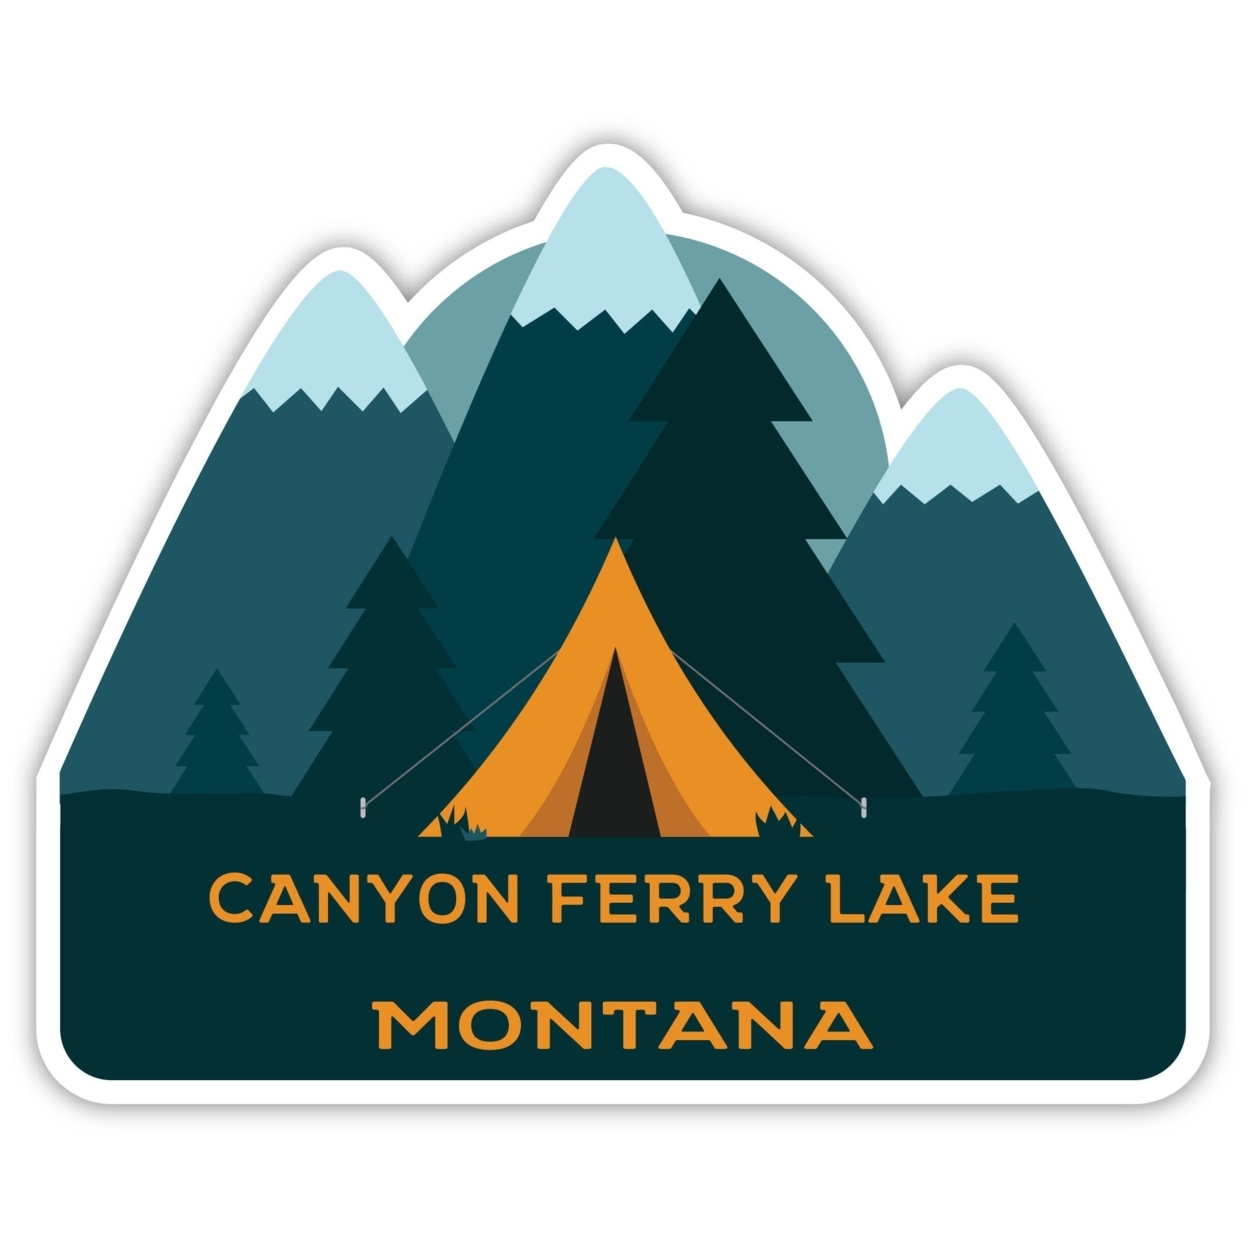 Canyon Ferry Lake Montana Souvenir Decorative Stickers (Choose Theme And Size) - 4-Pack, 4-Inch, Tent